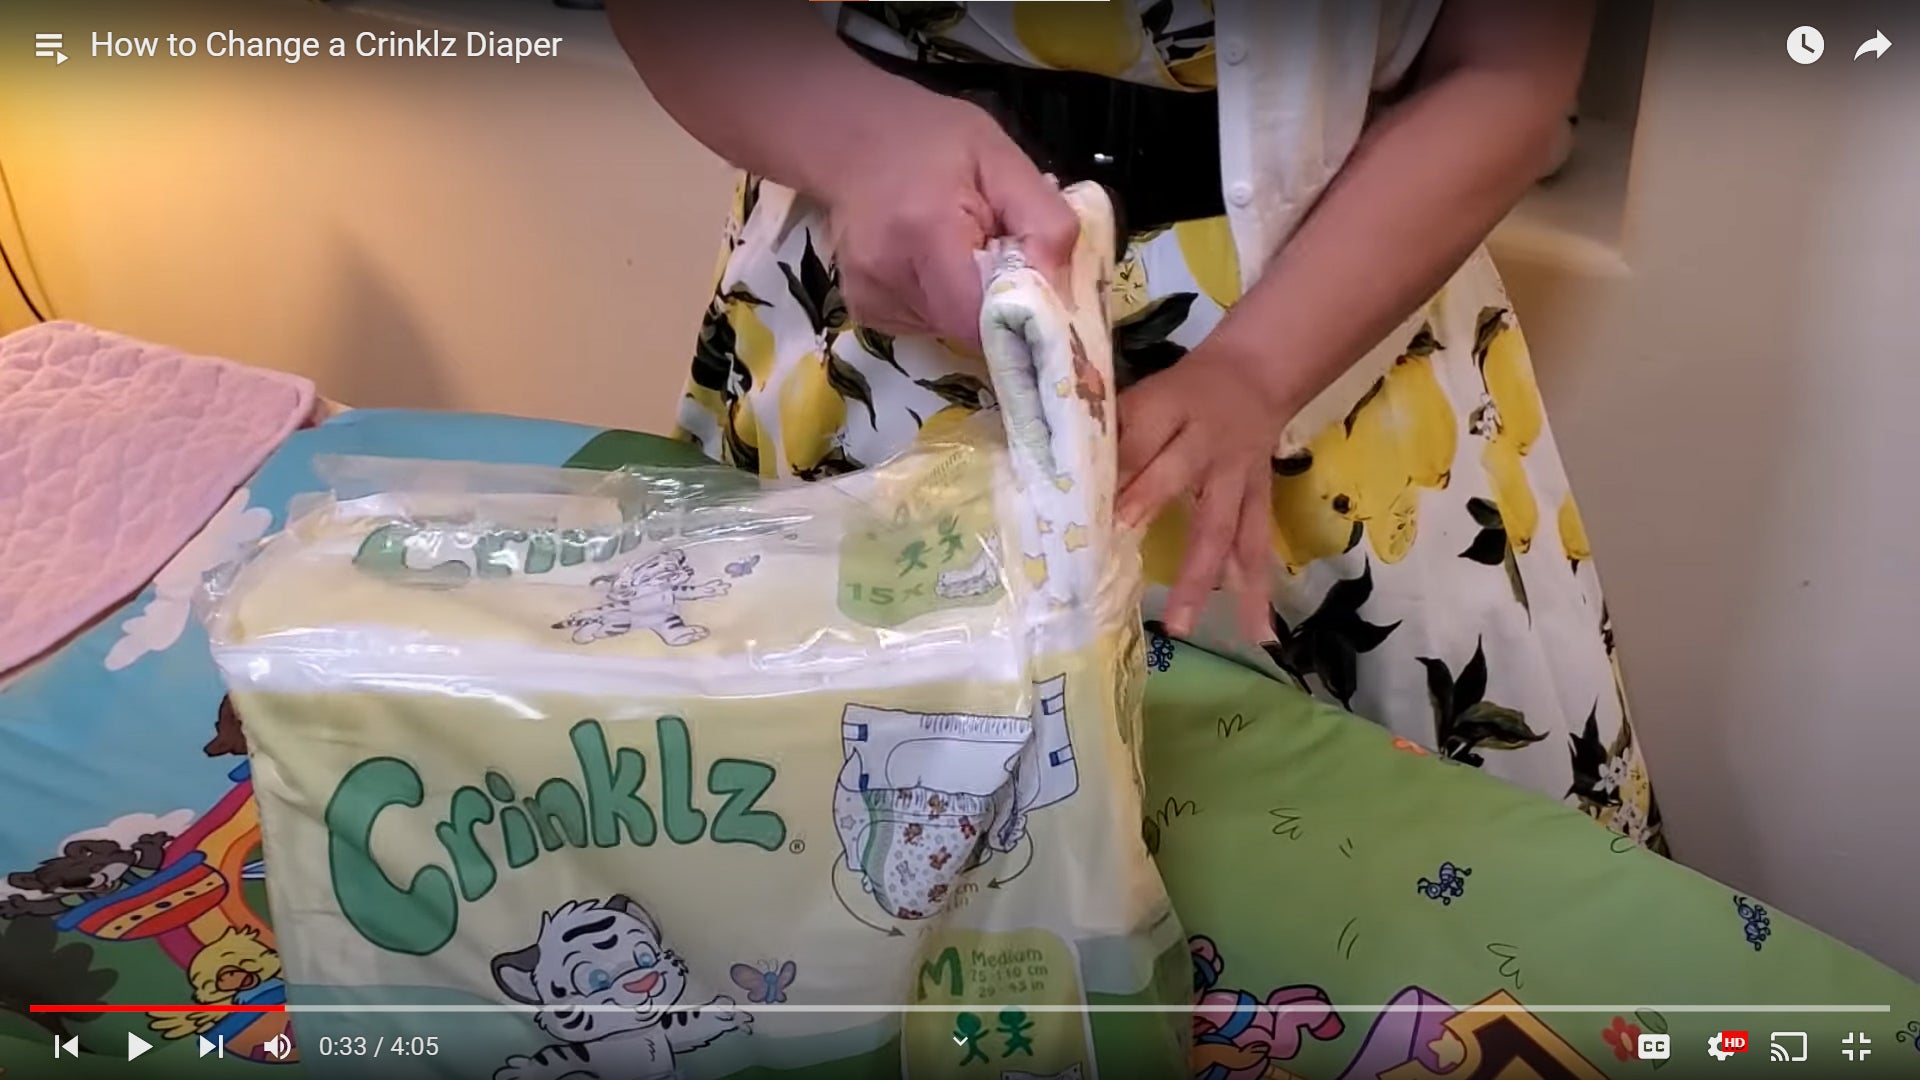 Learn how to change a Crinklz adult diaper.